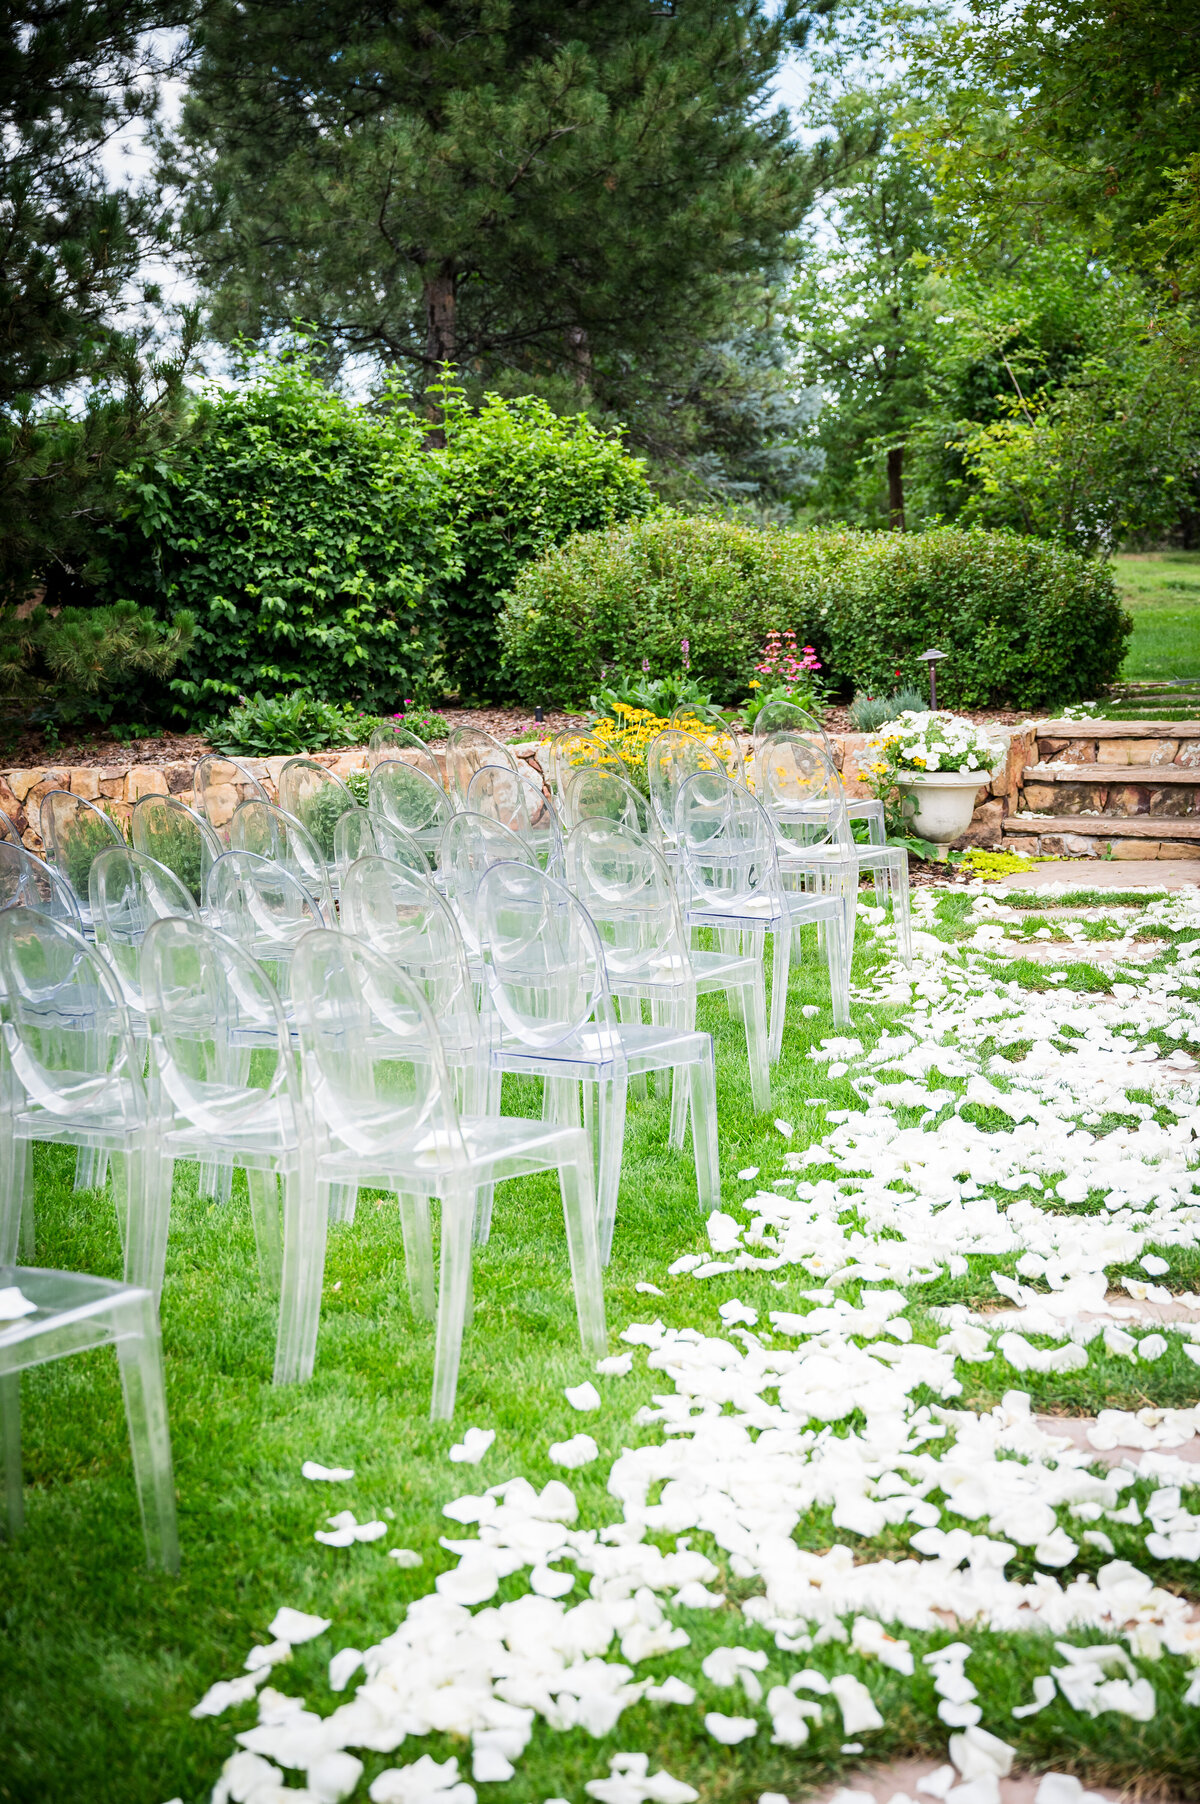 An outdoor wedding ceremony space with white flower petals all up the aisle and clear modern chairs for guests.